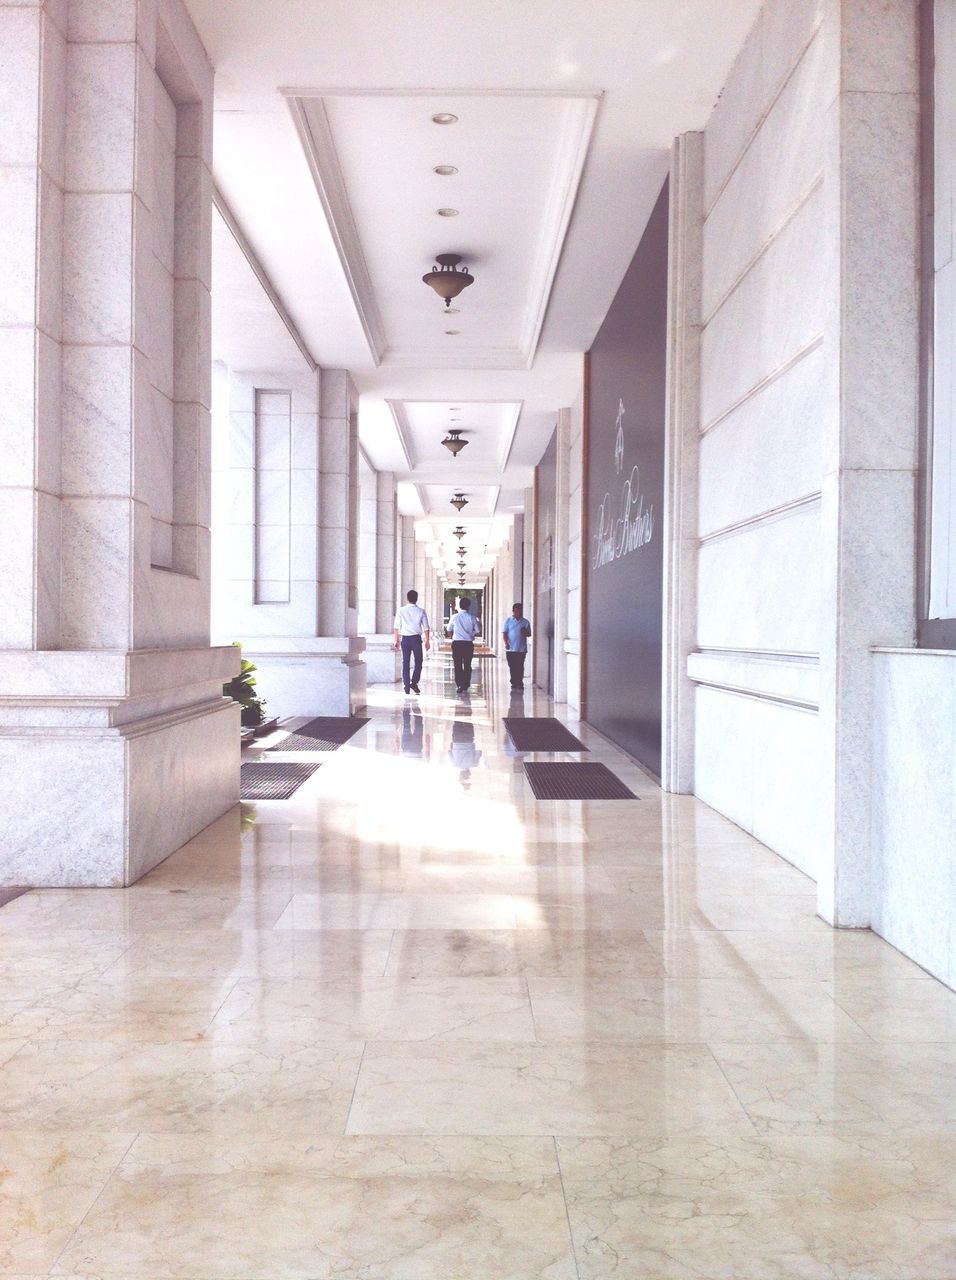 indoors, architecture, corridor, built structure, tiled floor, flooring, ceiling, empty, architectural column, the way forward, lighting equipment, in a row, building, modern, tile, wall - building feature, absence, reflection, illuminated, diminishing perspective